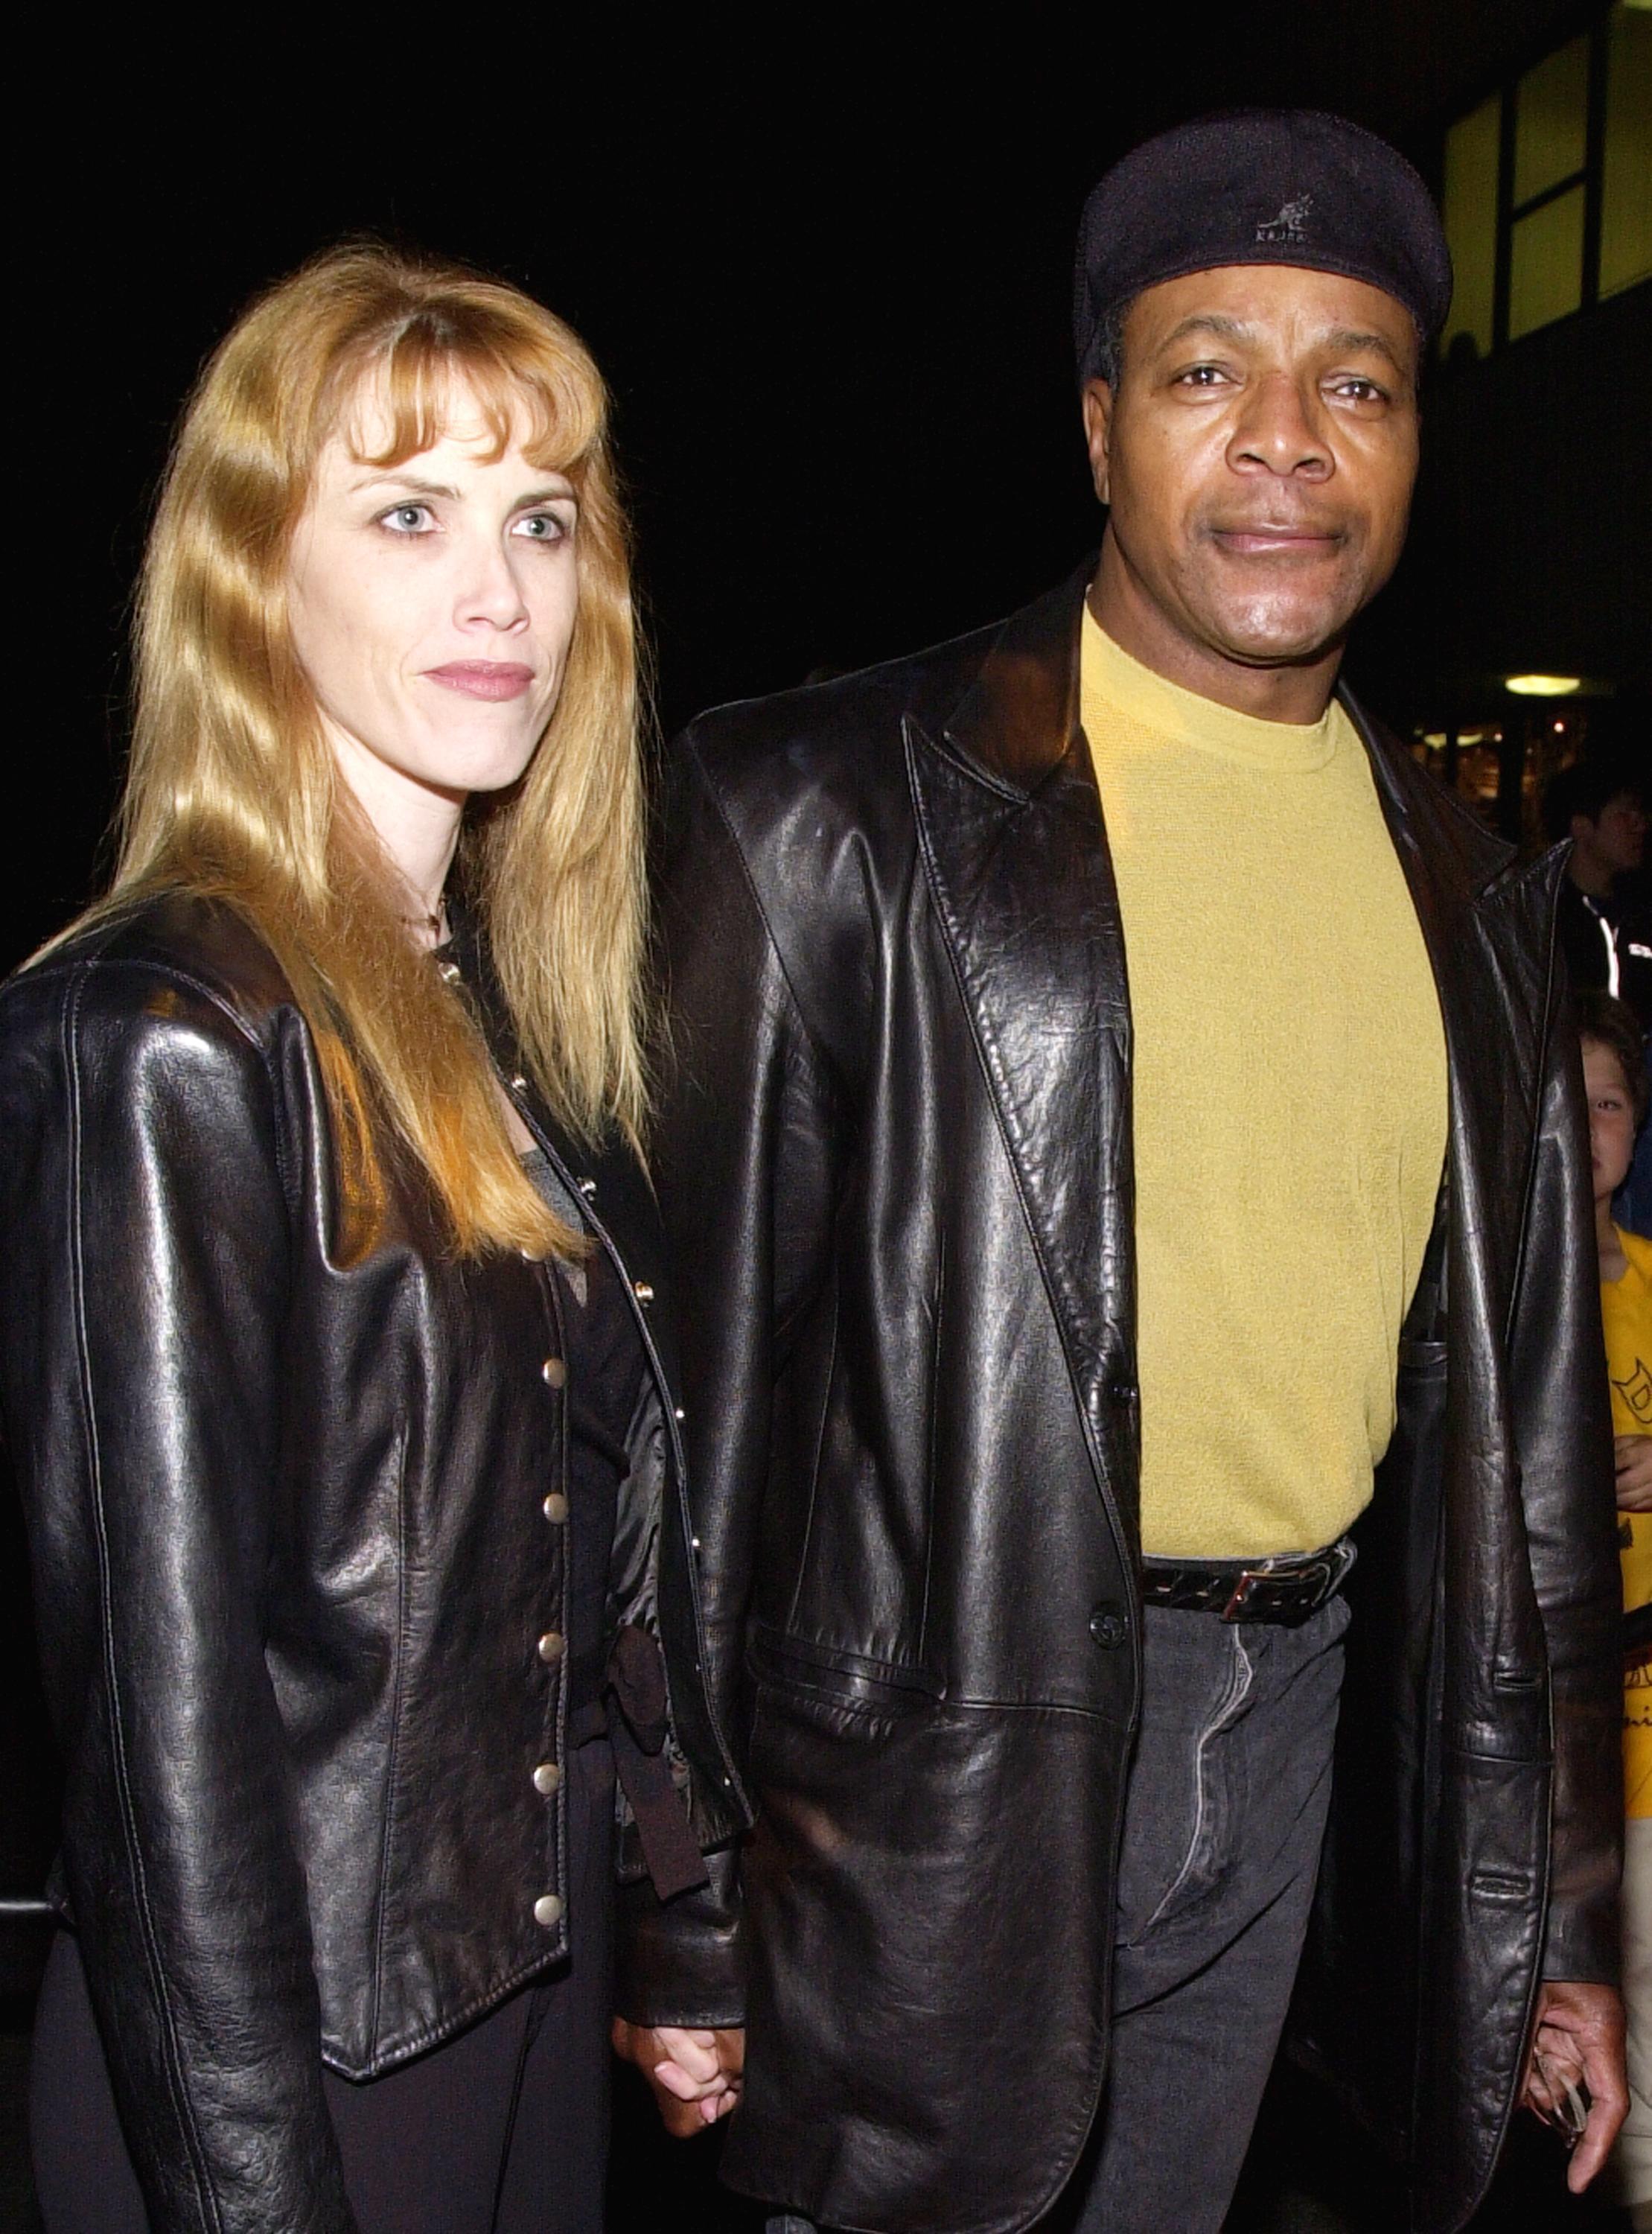 Actor Carl Weathers and Jennifer Peterson arrive at the 35th Anniversary of Gold's Gym November 16, 2000 in Venice California | Source: Getty Images